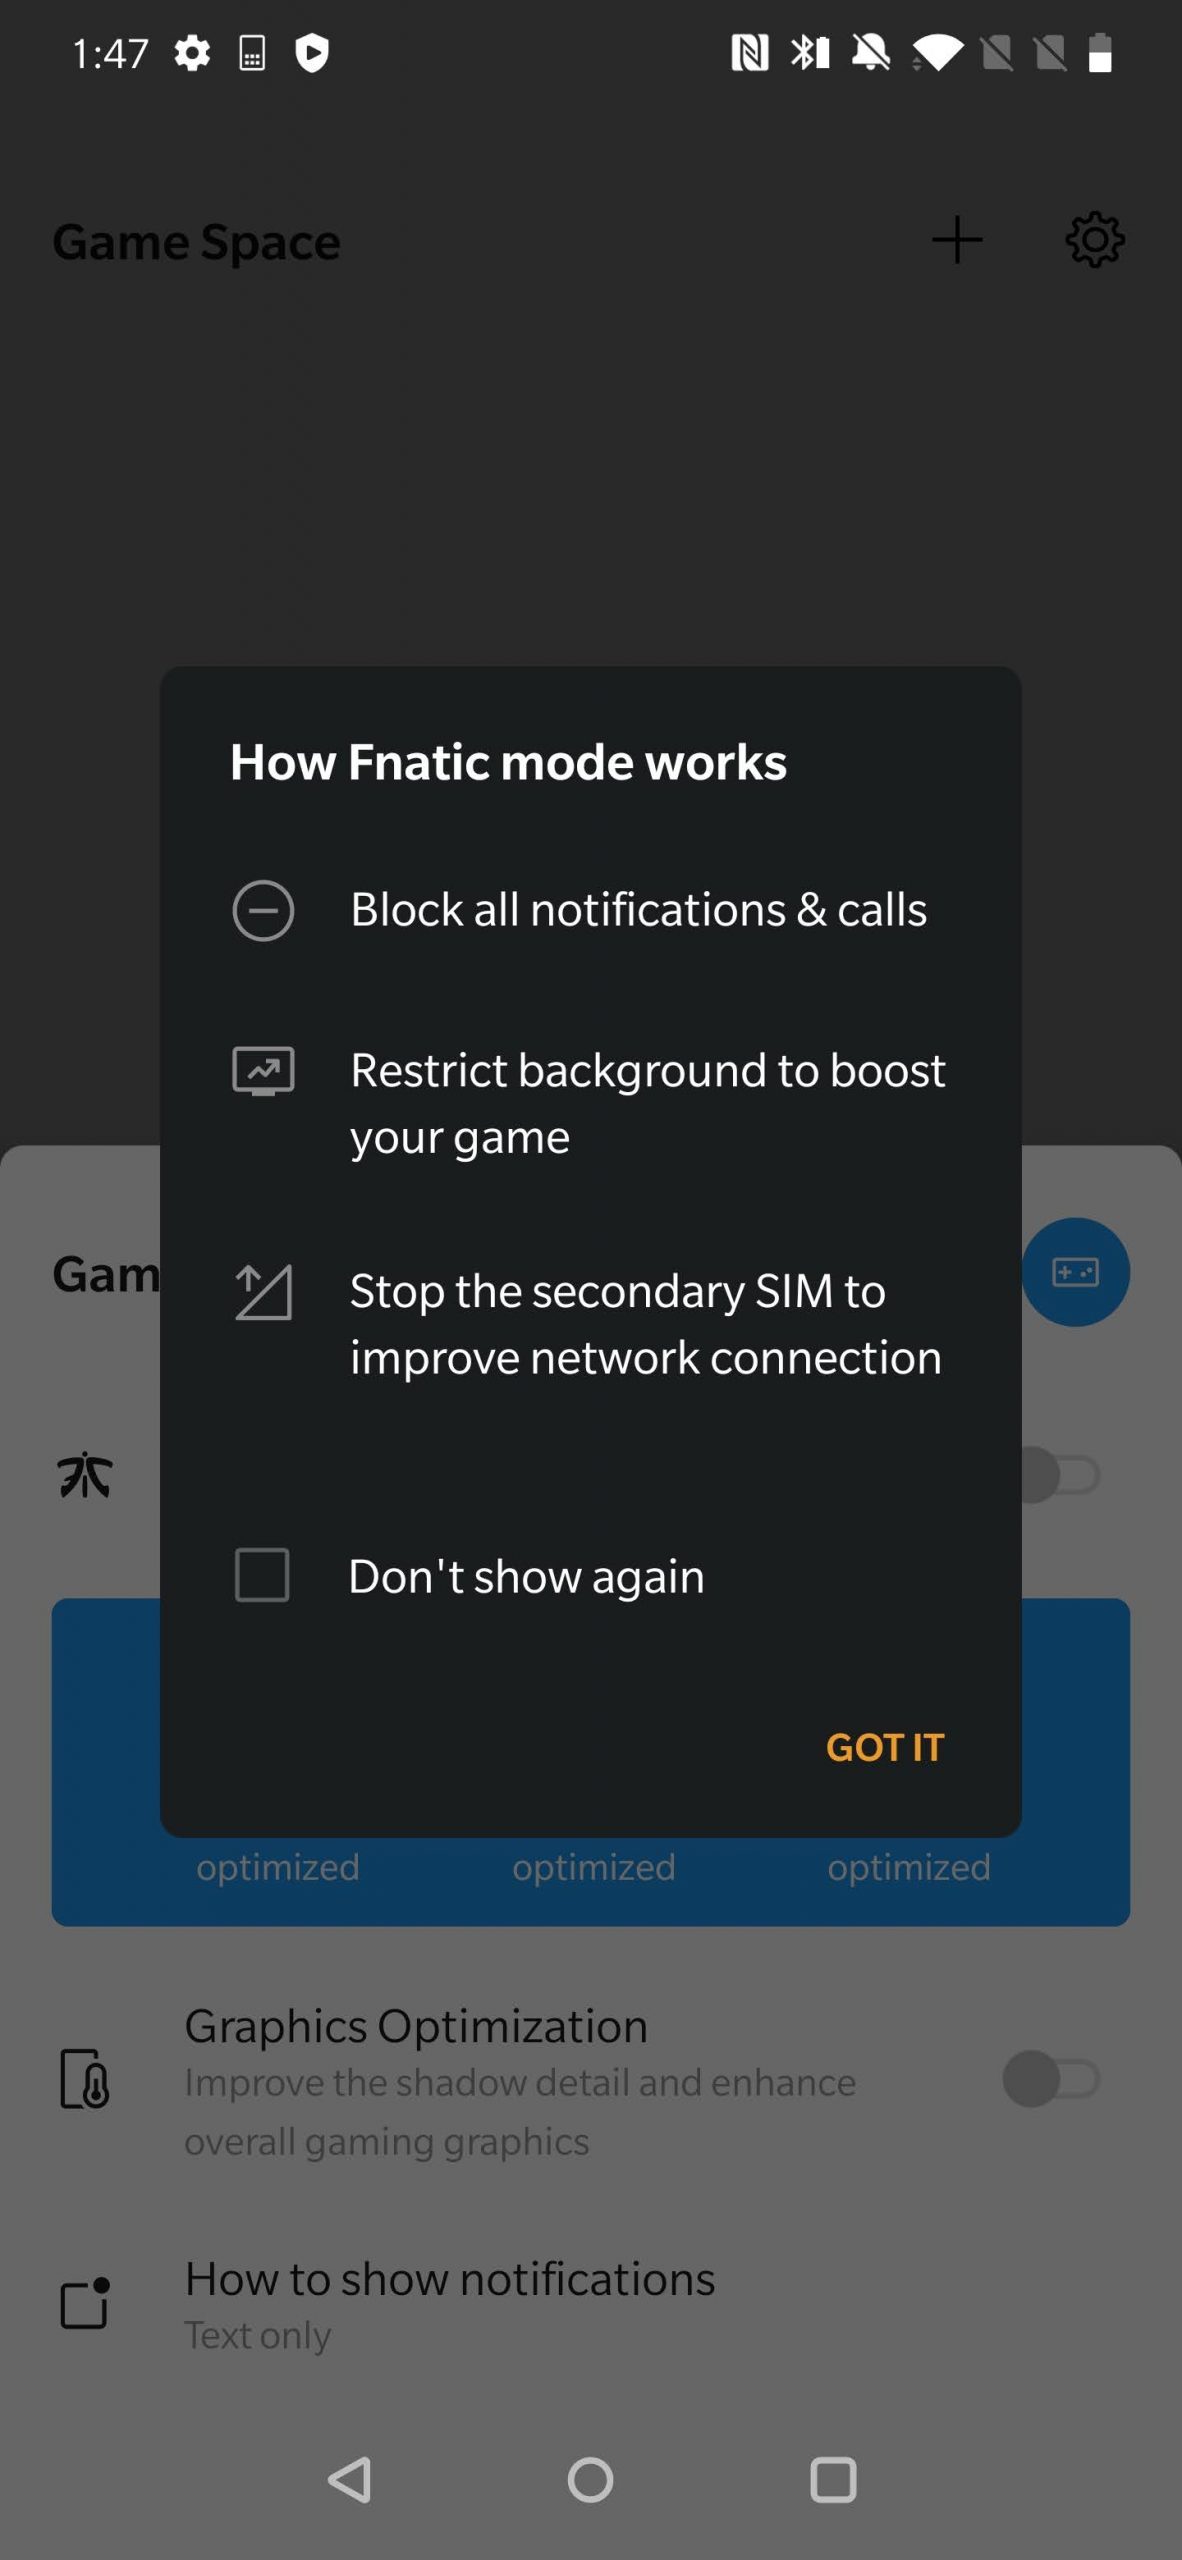 A screenshot of the OnePlus Game Space app showing a warning that appears prior to enabling Fnatic Mode.